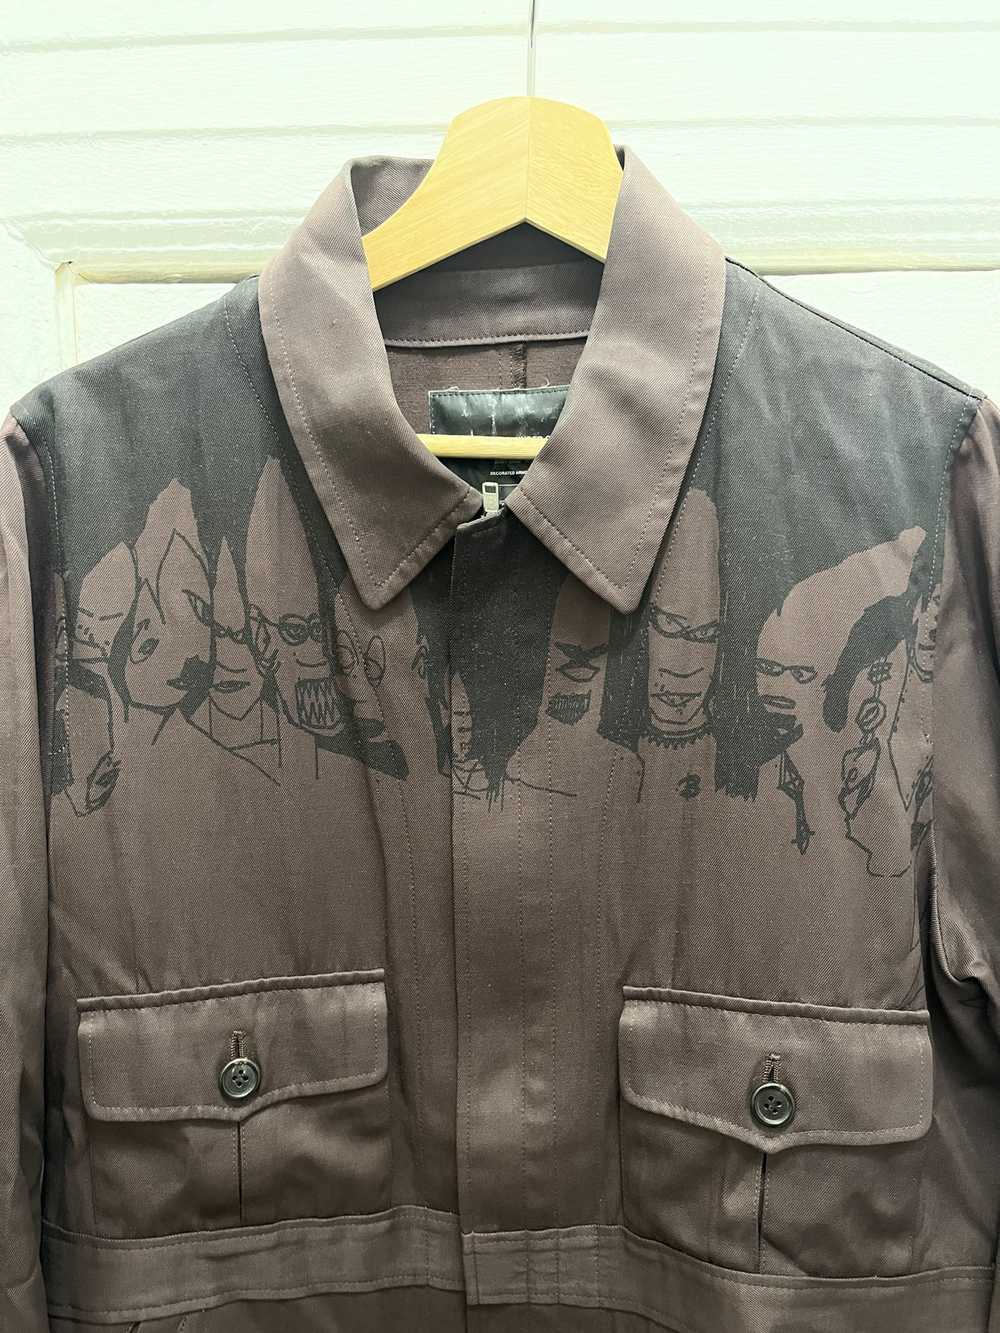 Undercover Undercover AW01 Futura Jacket - image 2